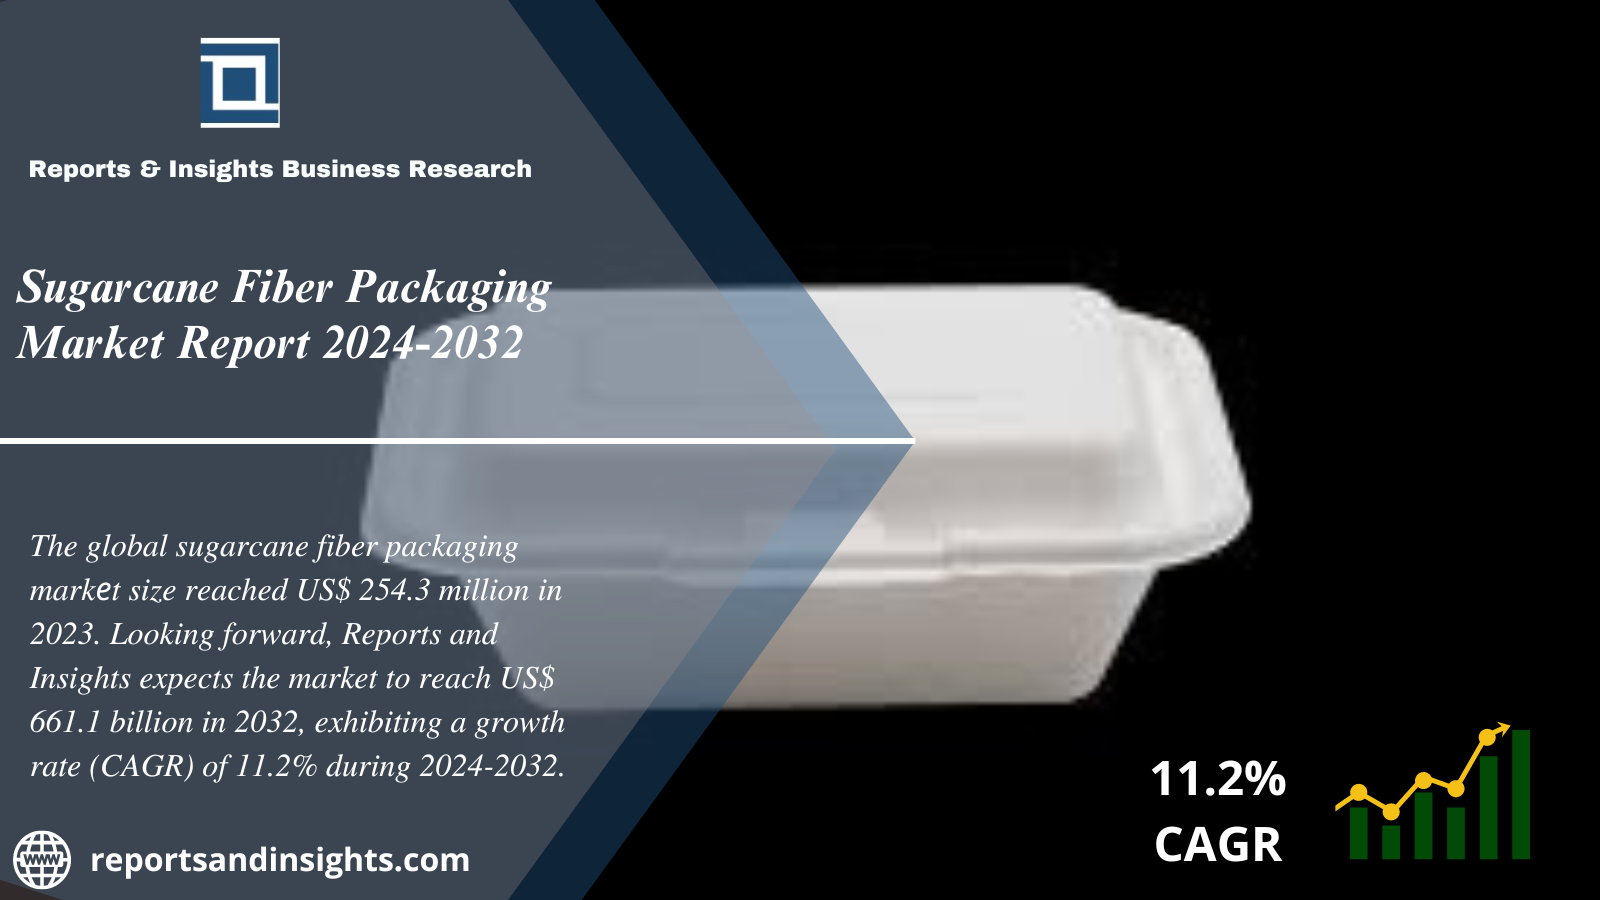 Sugarcane Fiber Packaging Market 2024 to 2032: Growth, Share, Size, Trends and Leading Key Players